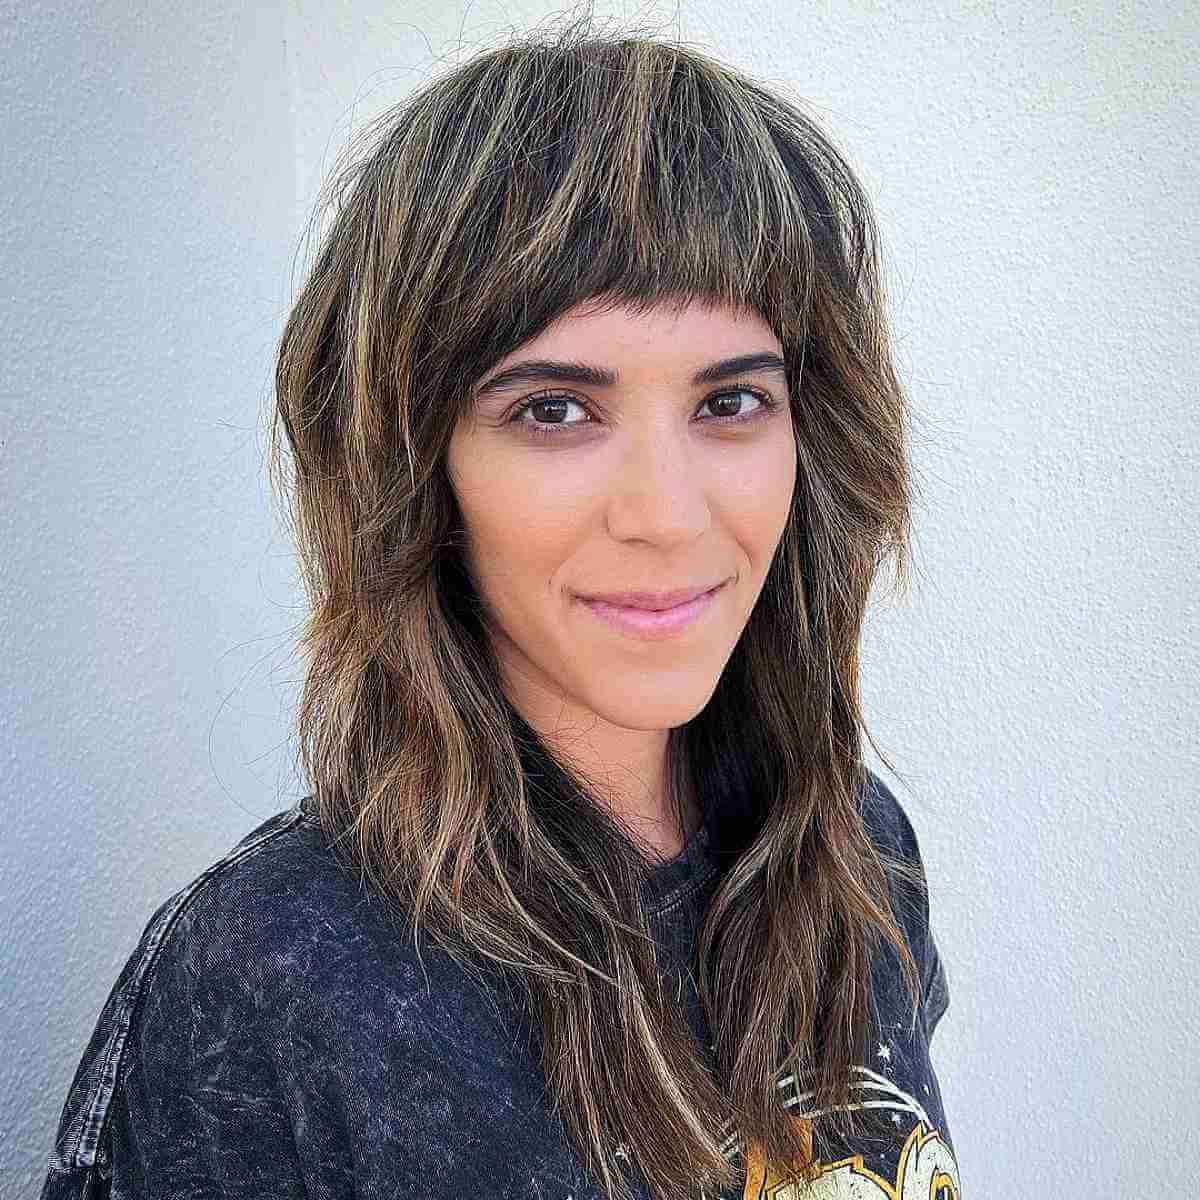 Medium Shag with Rounded Bangs for a Long Face